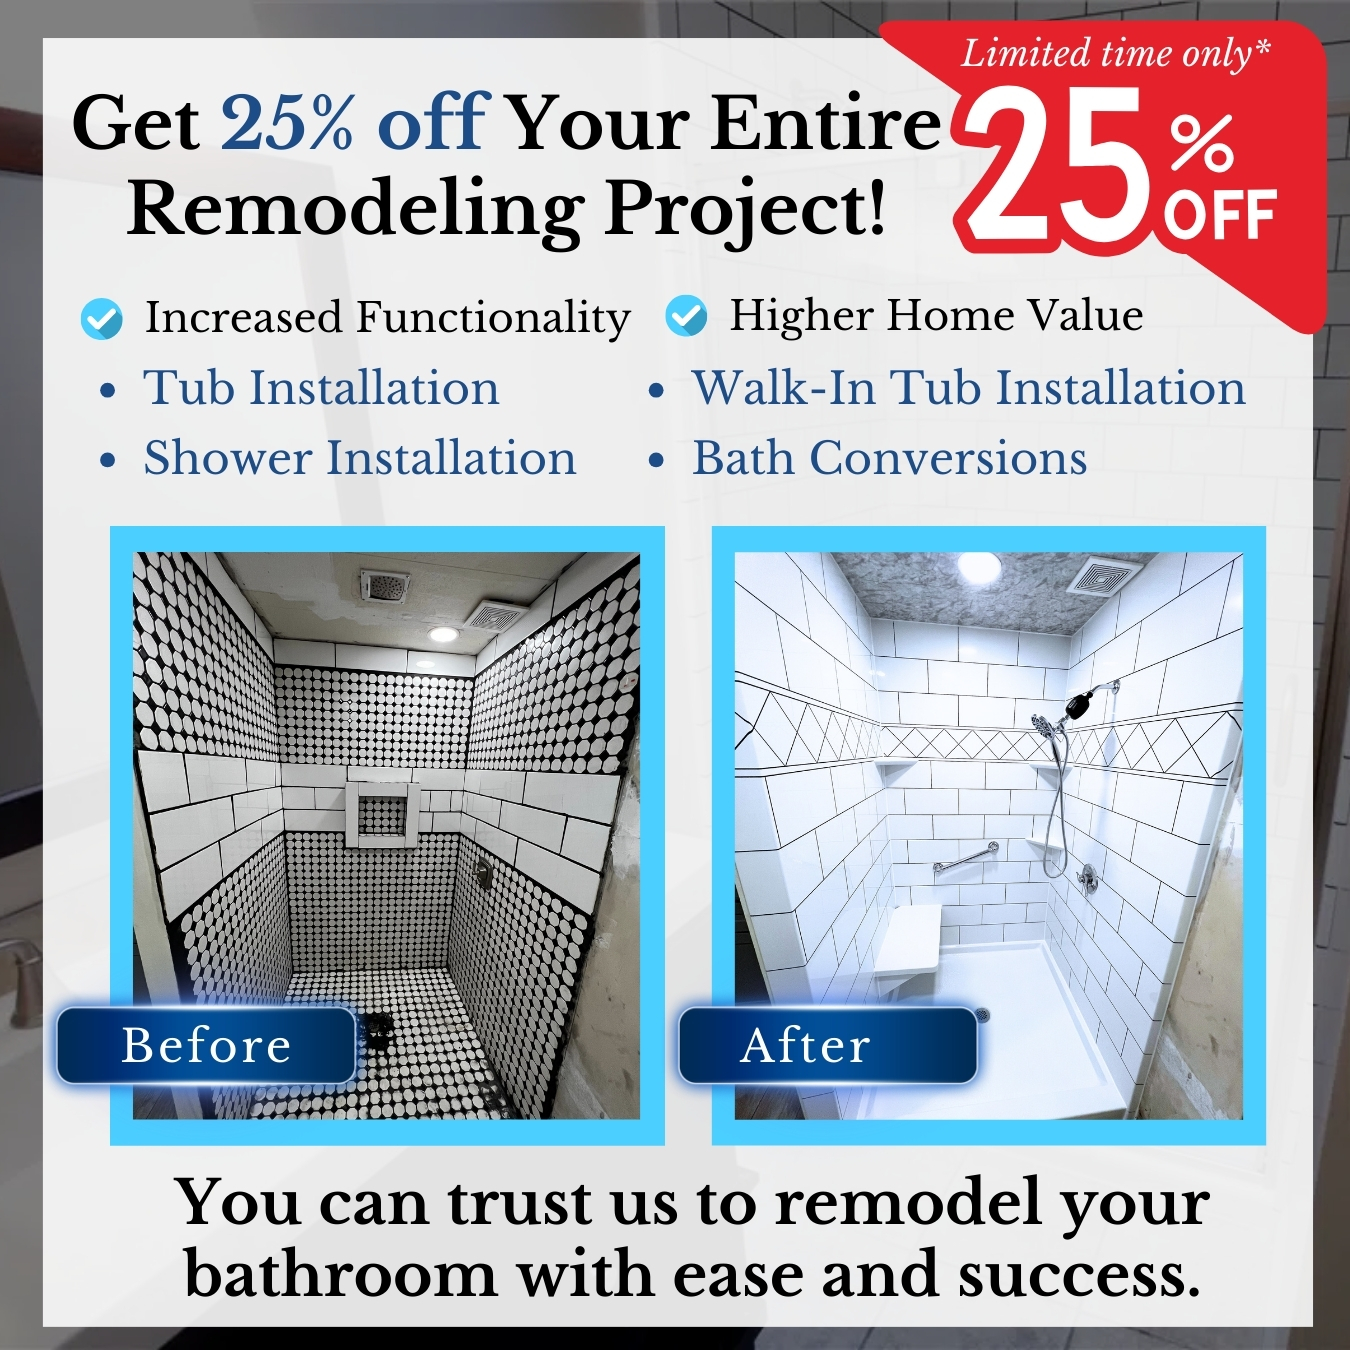 20% off Entire Remodeling Project